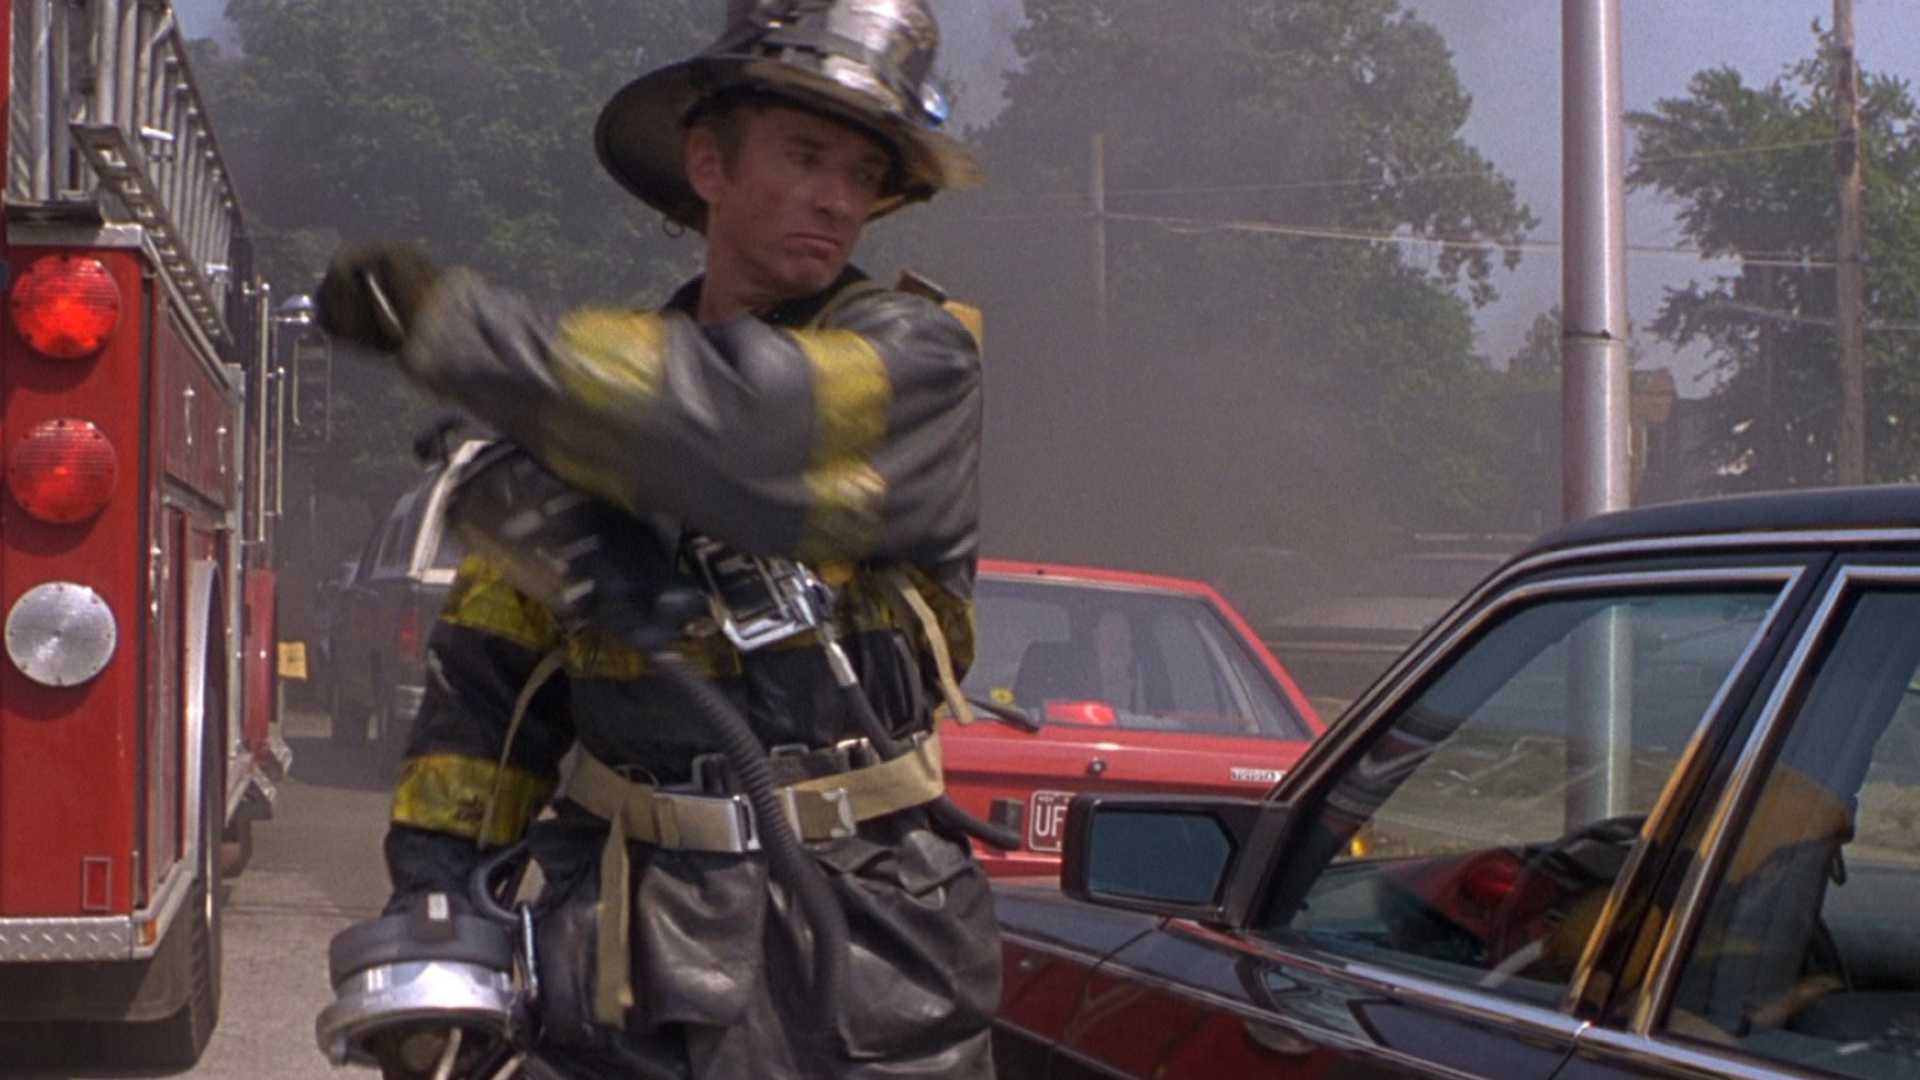 Backdraft, BuriedonMars's movie review, In-depth analysis, Critical examination, 1920x1080 Full HD Desktop